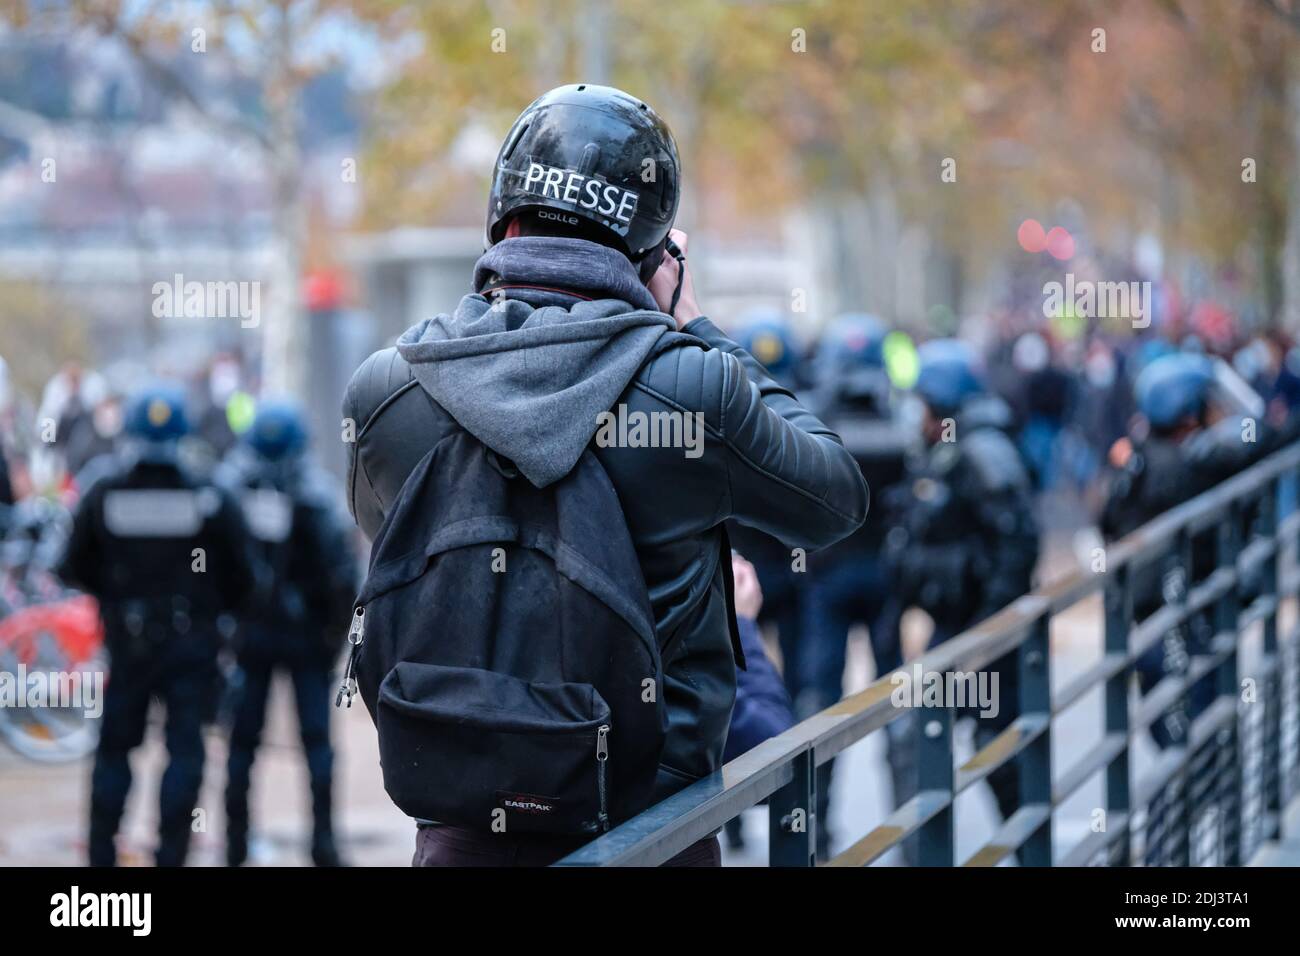 Lyon (France), 12 December 2020. 2000 demonstrators according to the Rhône prefecture for this new pride march in Lyon. Journalist filming the police. Stock Photo